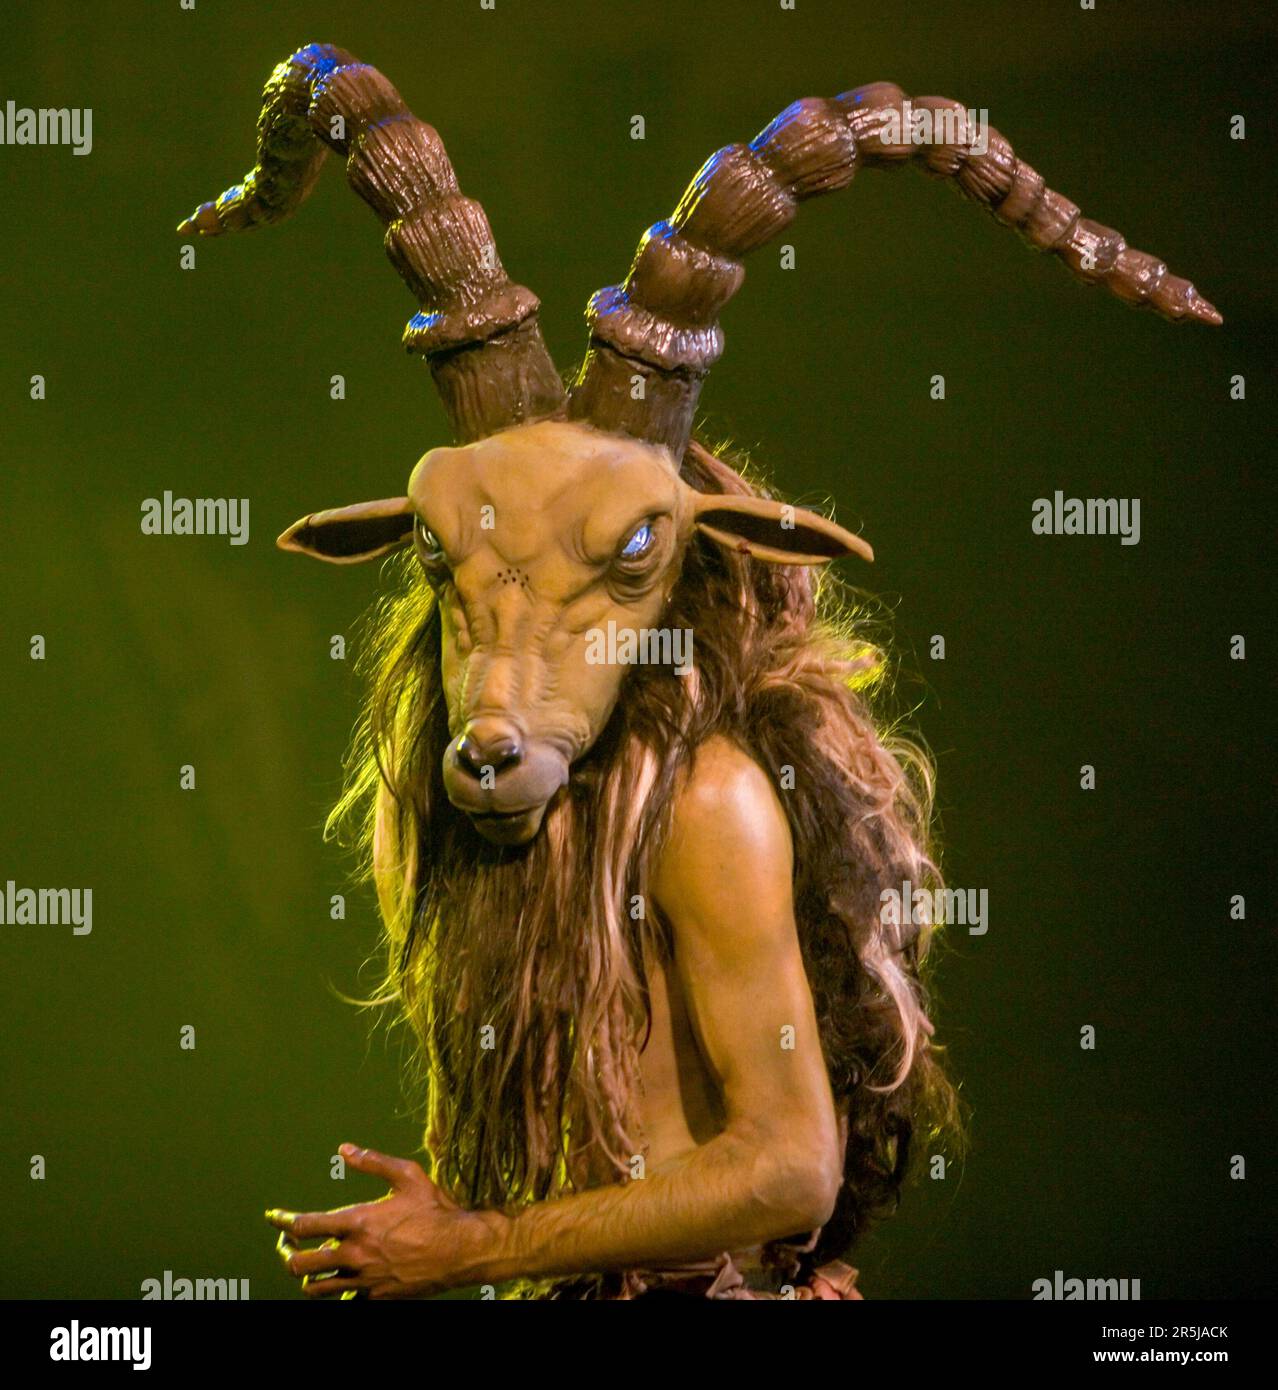 The Special Effects Creatures Category was won by artist Courtney Bell at the New Zealand Body Art Awards Stock Photo